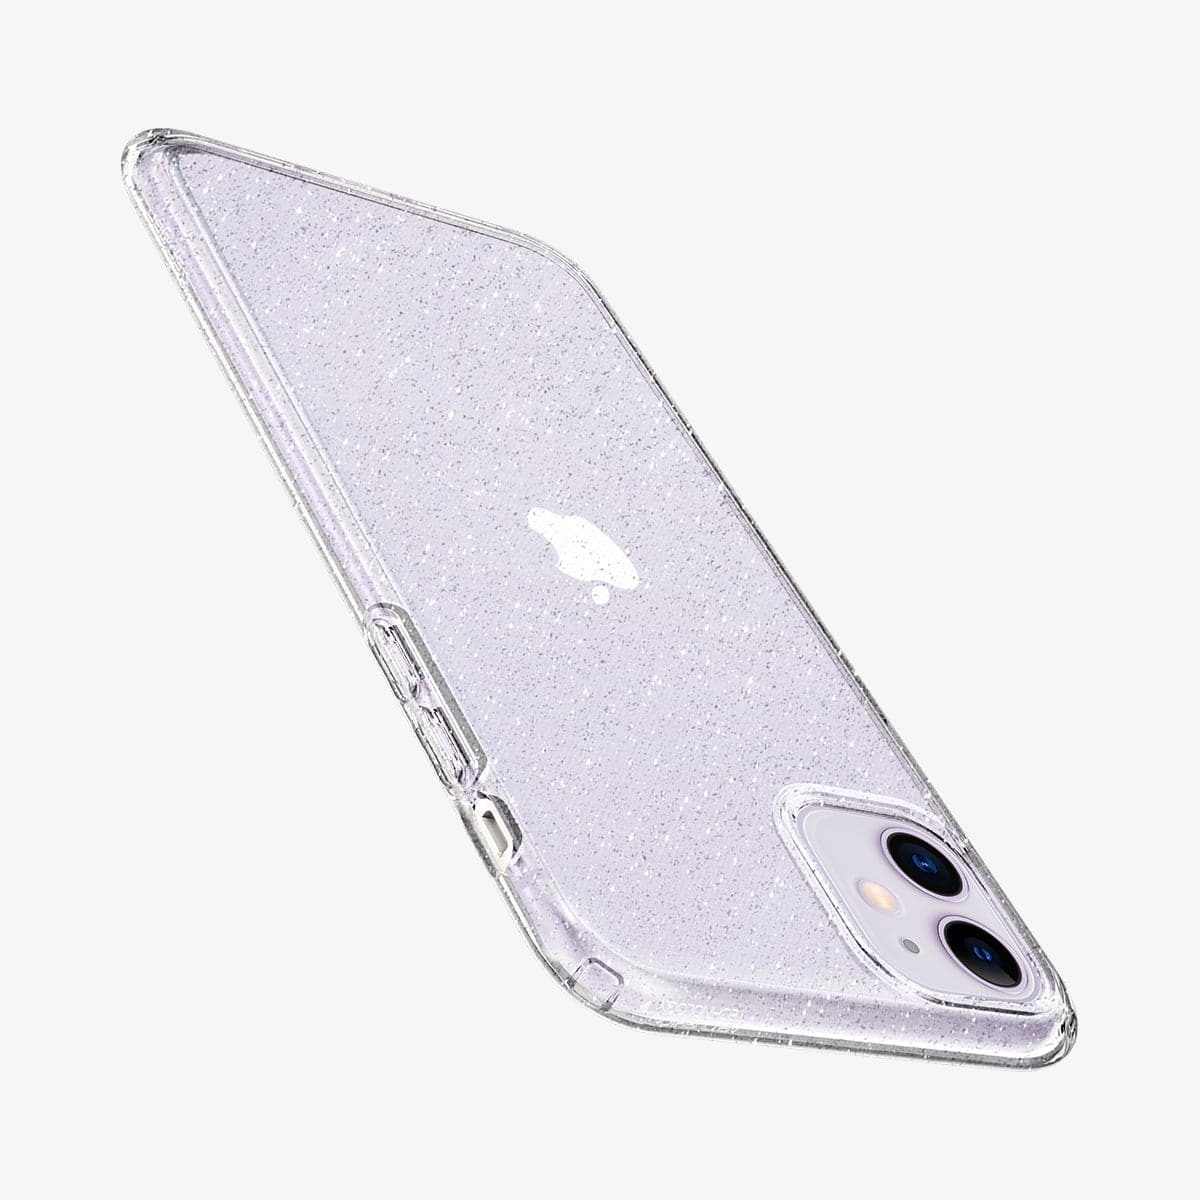 076CS27181 - iPhone 11 Case Liquid Crystal Glitter in crystal quartz showing the back, side and top